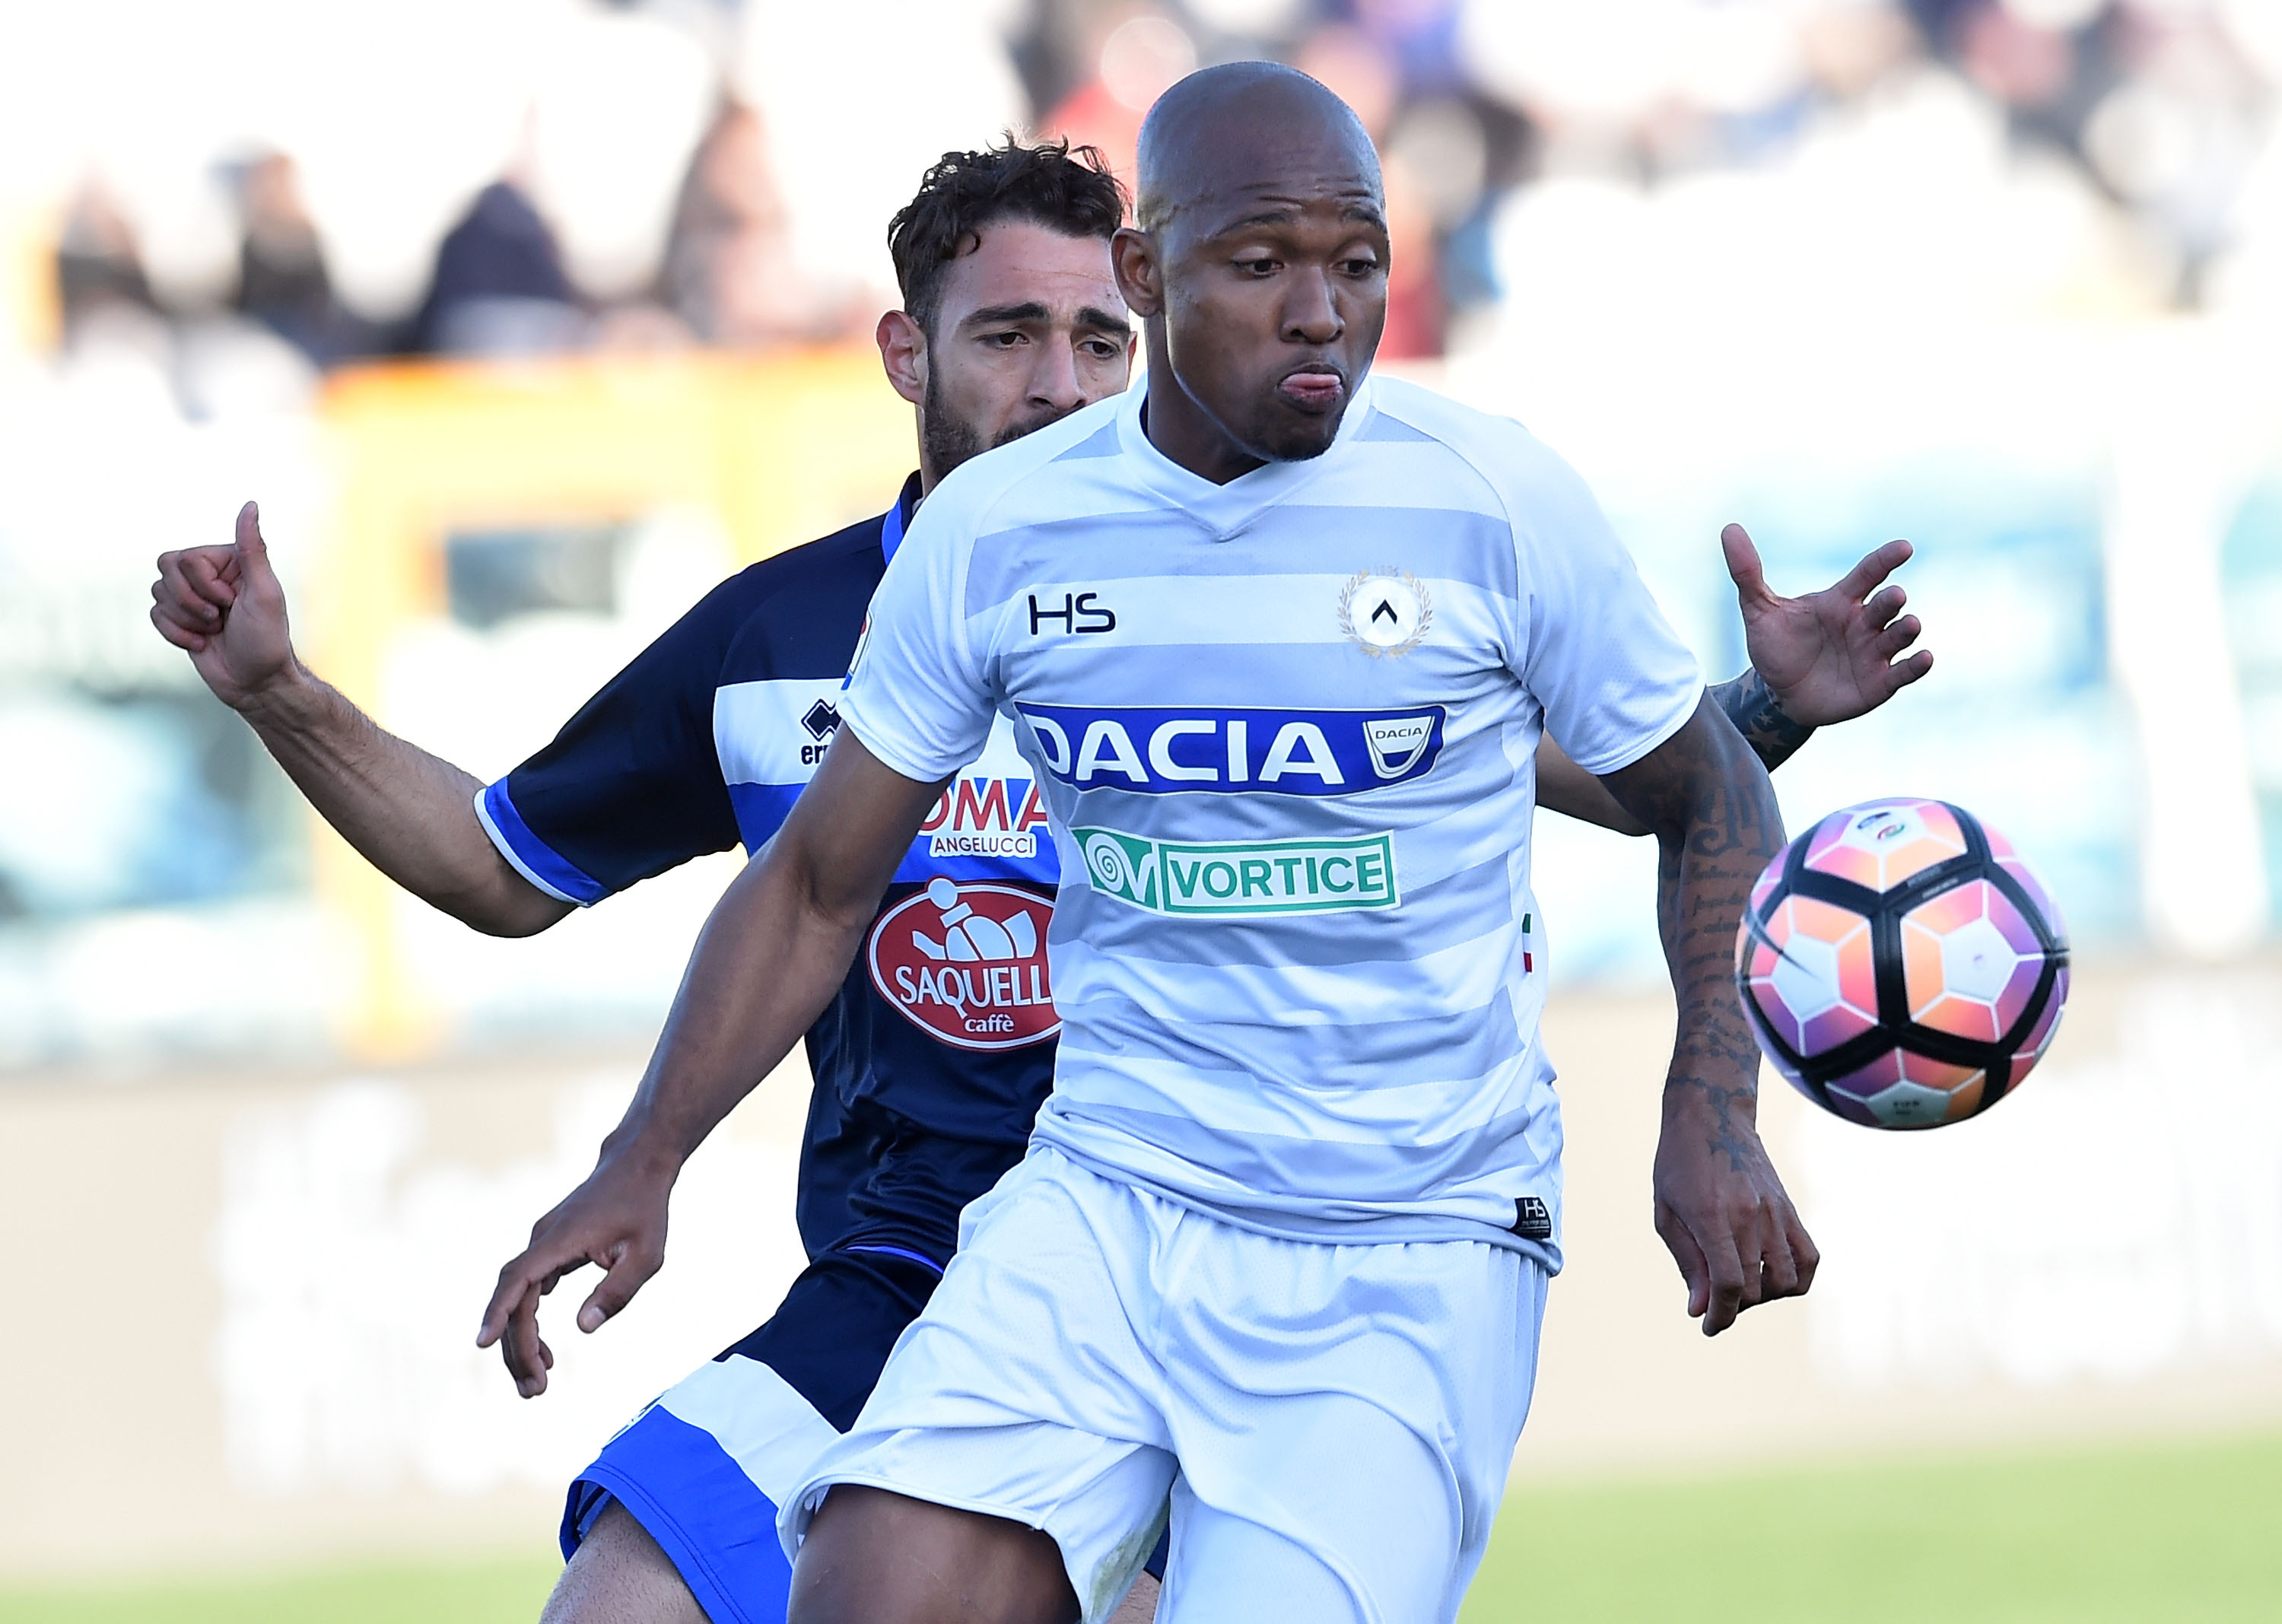 Udinese’s Samir: “Match With Inter Will Be Similar To The One Against Atalanta”